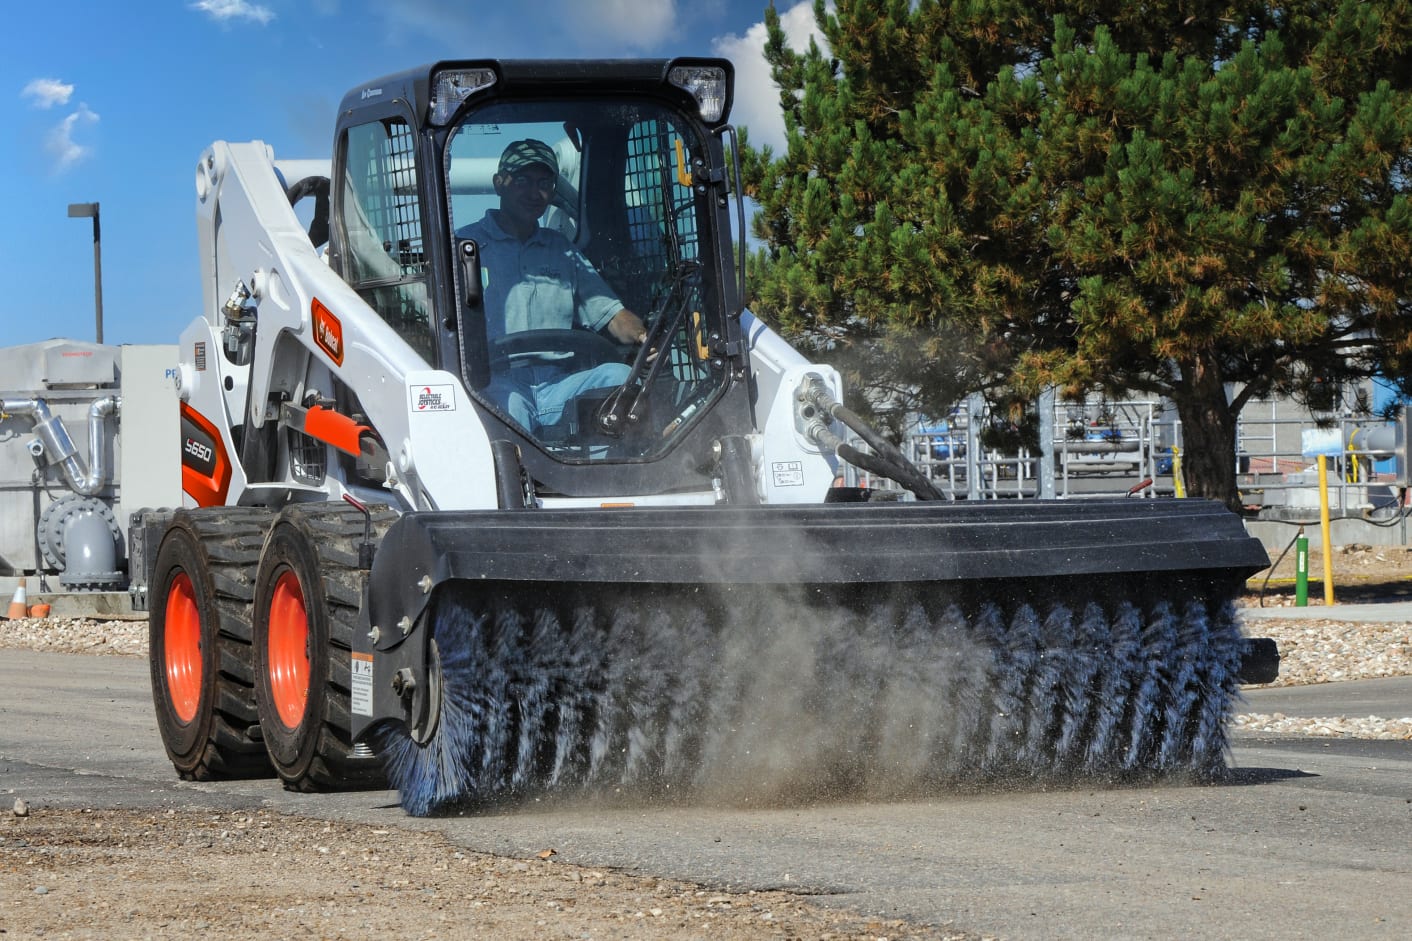 Browse Specs and more for the S650 Skid-Steer Loader - Bobcat of Atlanta